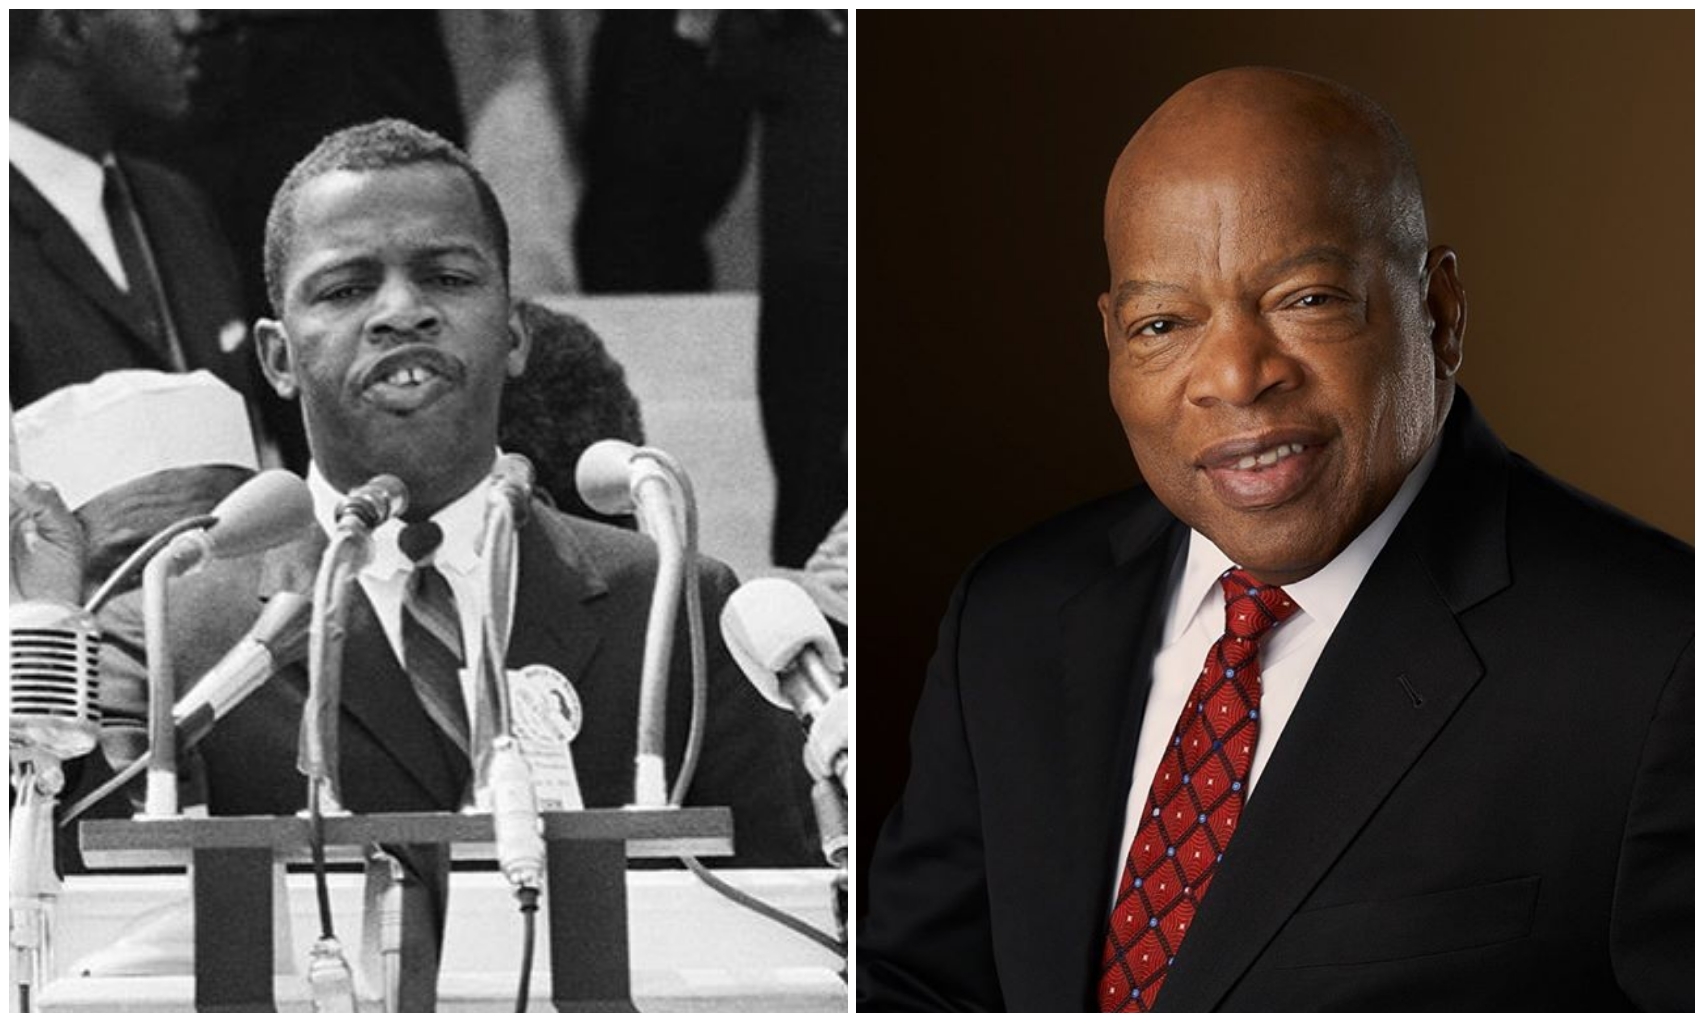 Civil Rights leader John Lewis passes  away aged 80 after a battle with cancer